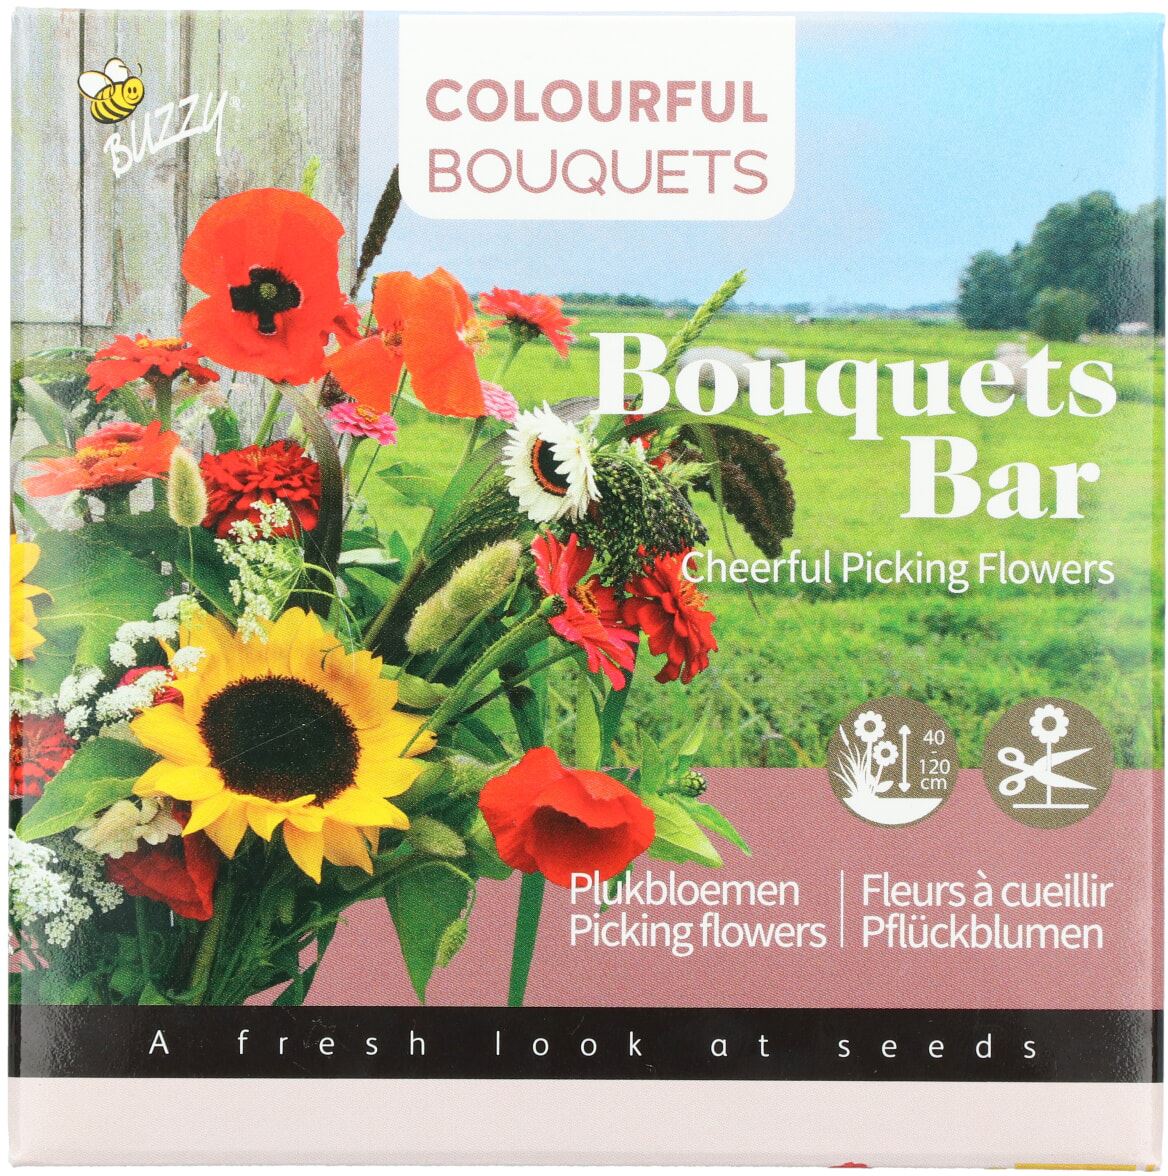 Buzzy-Bouquets-Bar-Cheerful-Picking-Flowers-8-